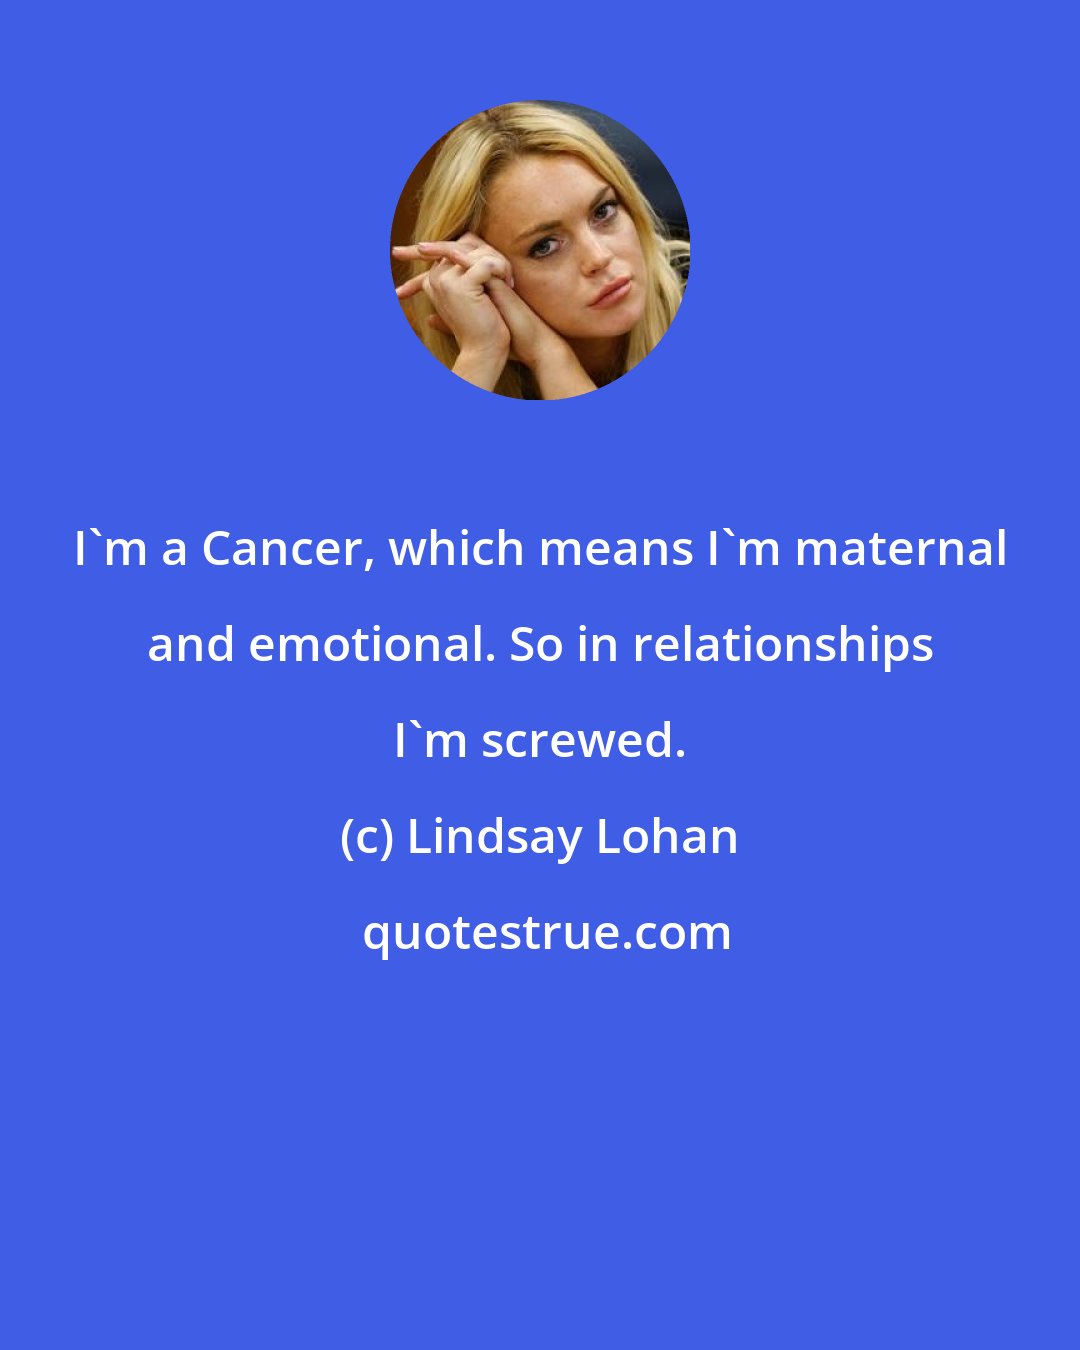 Lindsay Lohan: I'm a Cancer, which means I'm maternal and emotional. So in relationships I'm screwed.